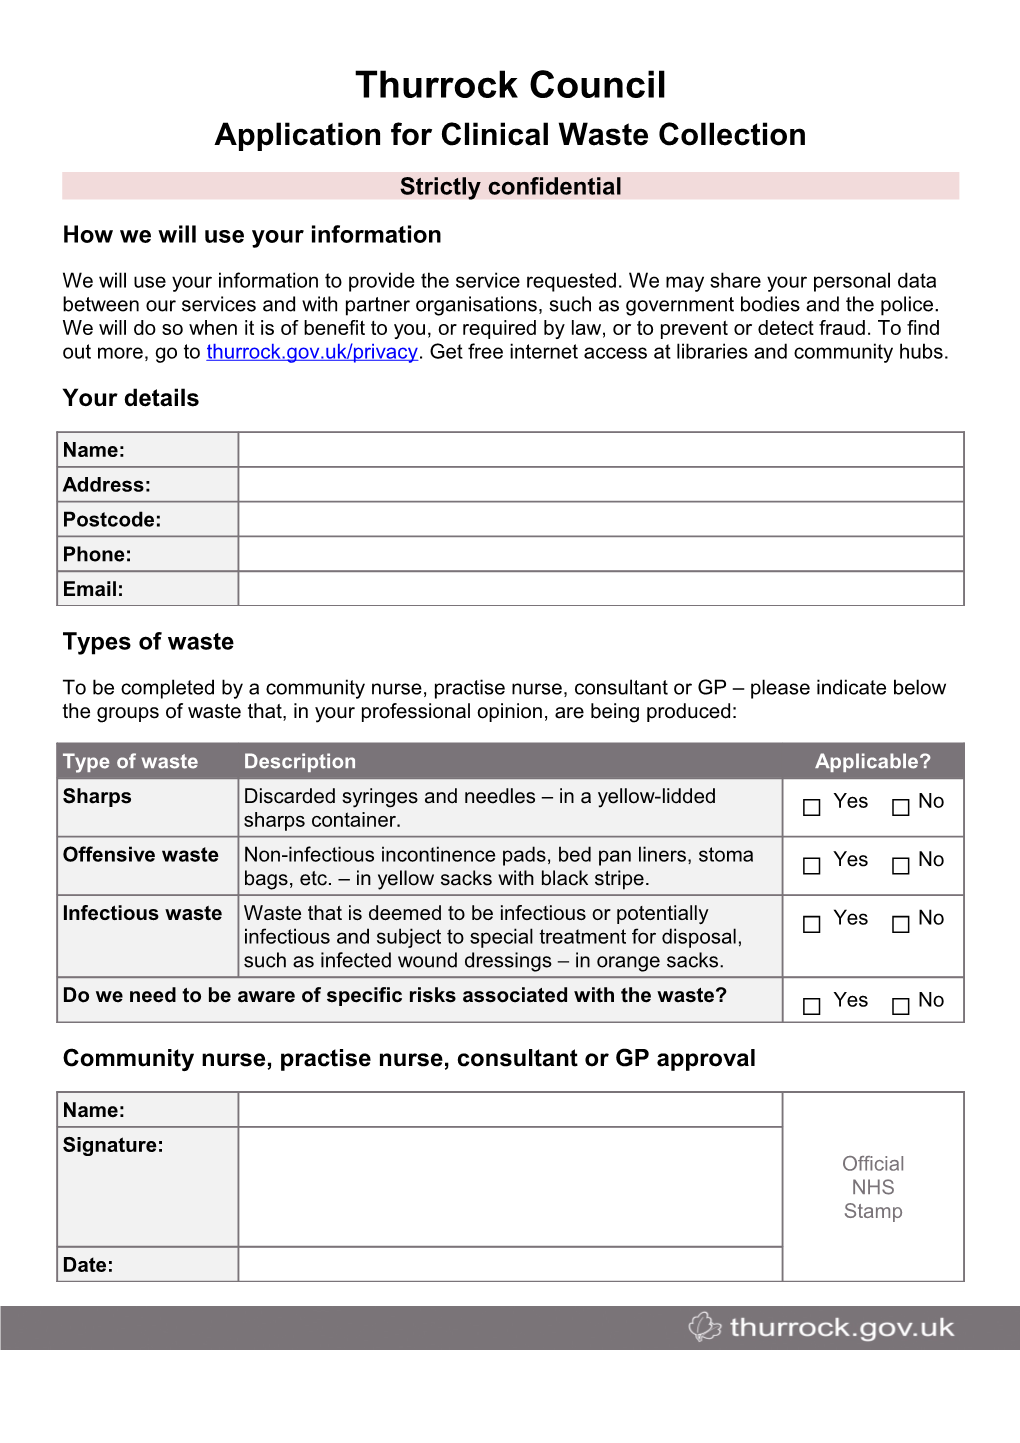 Thurrock Council - Clinical Waste Collection Application Form